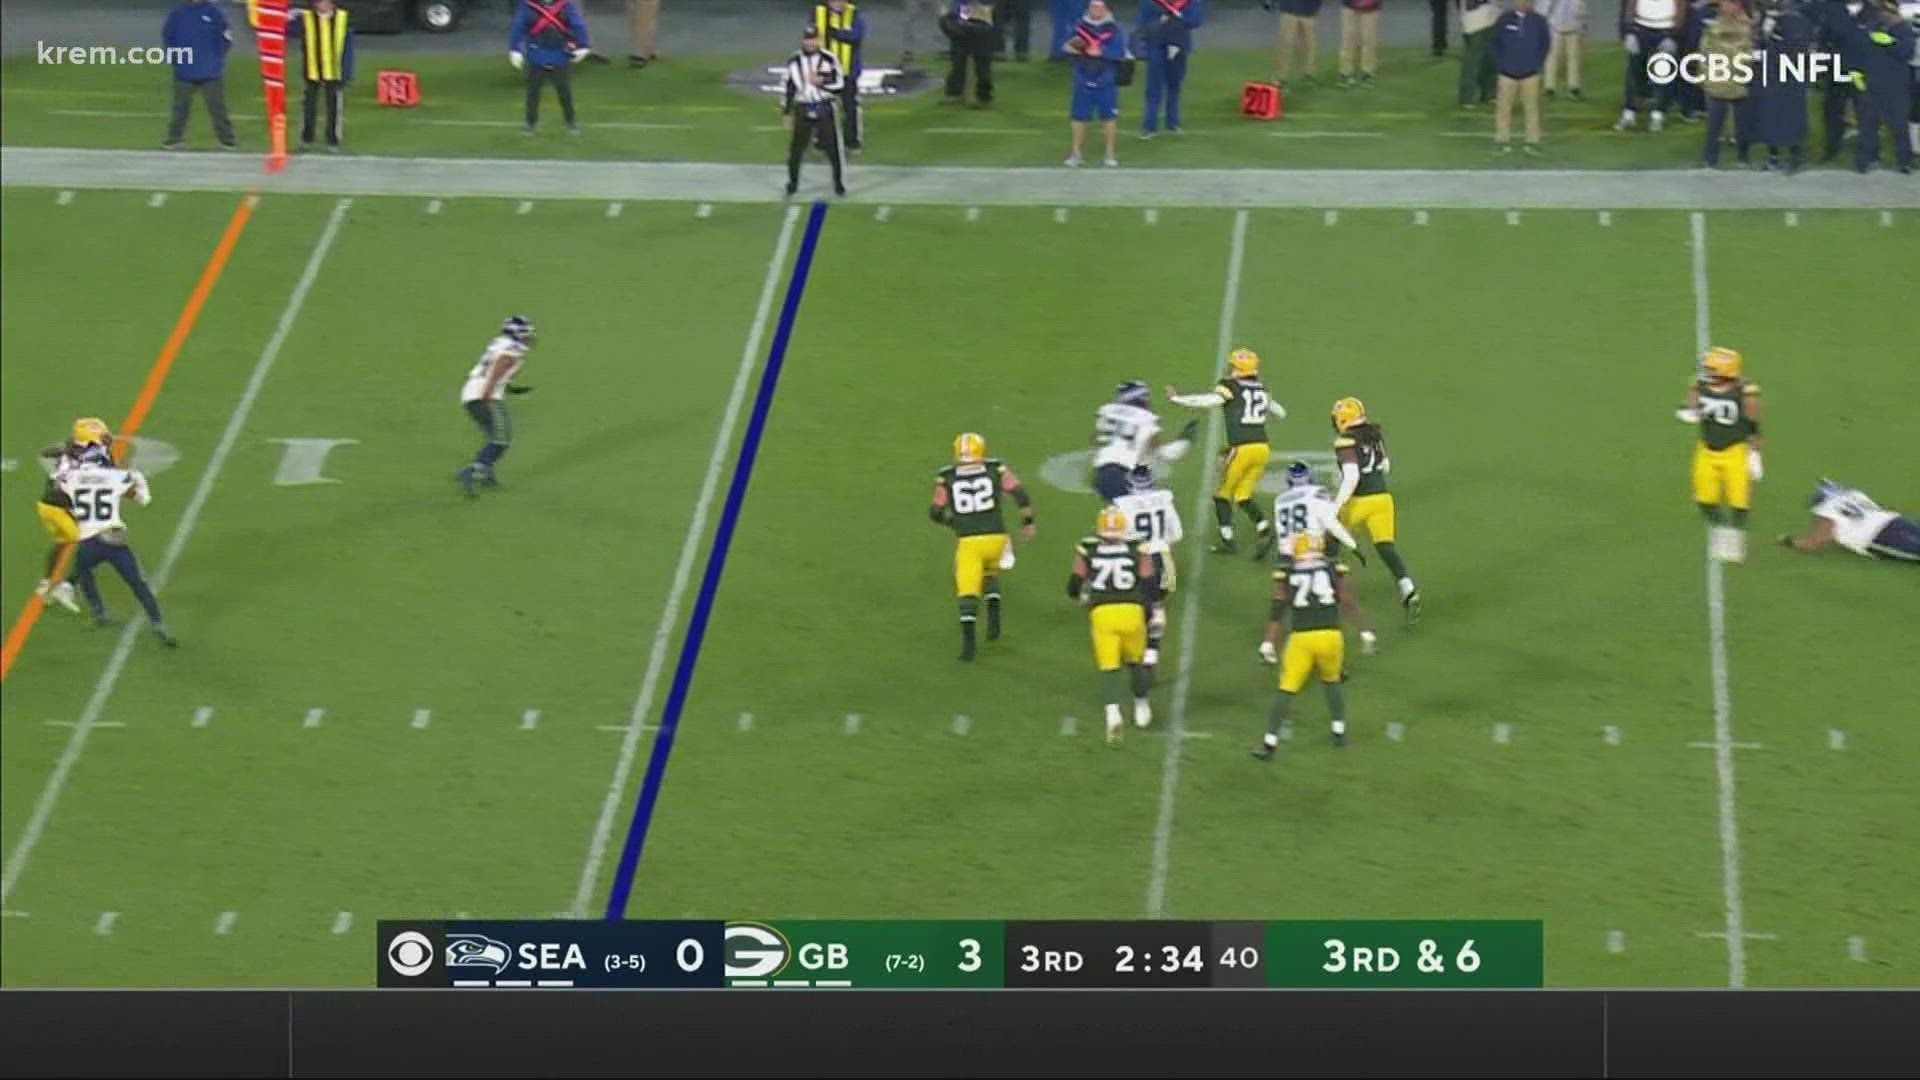 Russell Wilson couldn't penetrate the Packers' defense in his first game back from his injury.